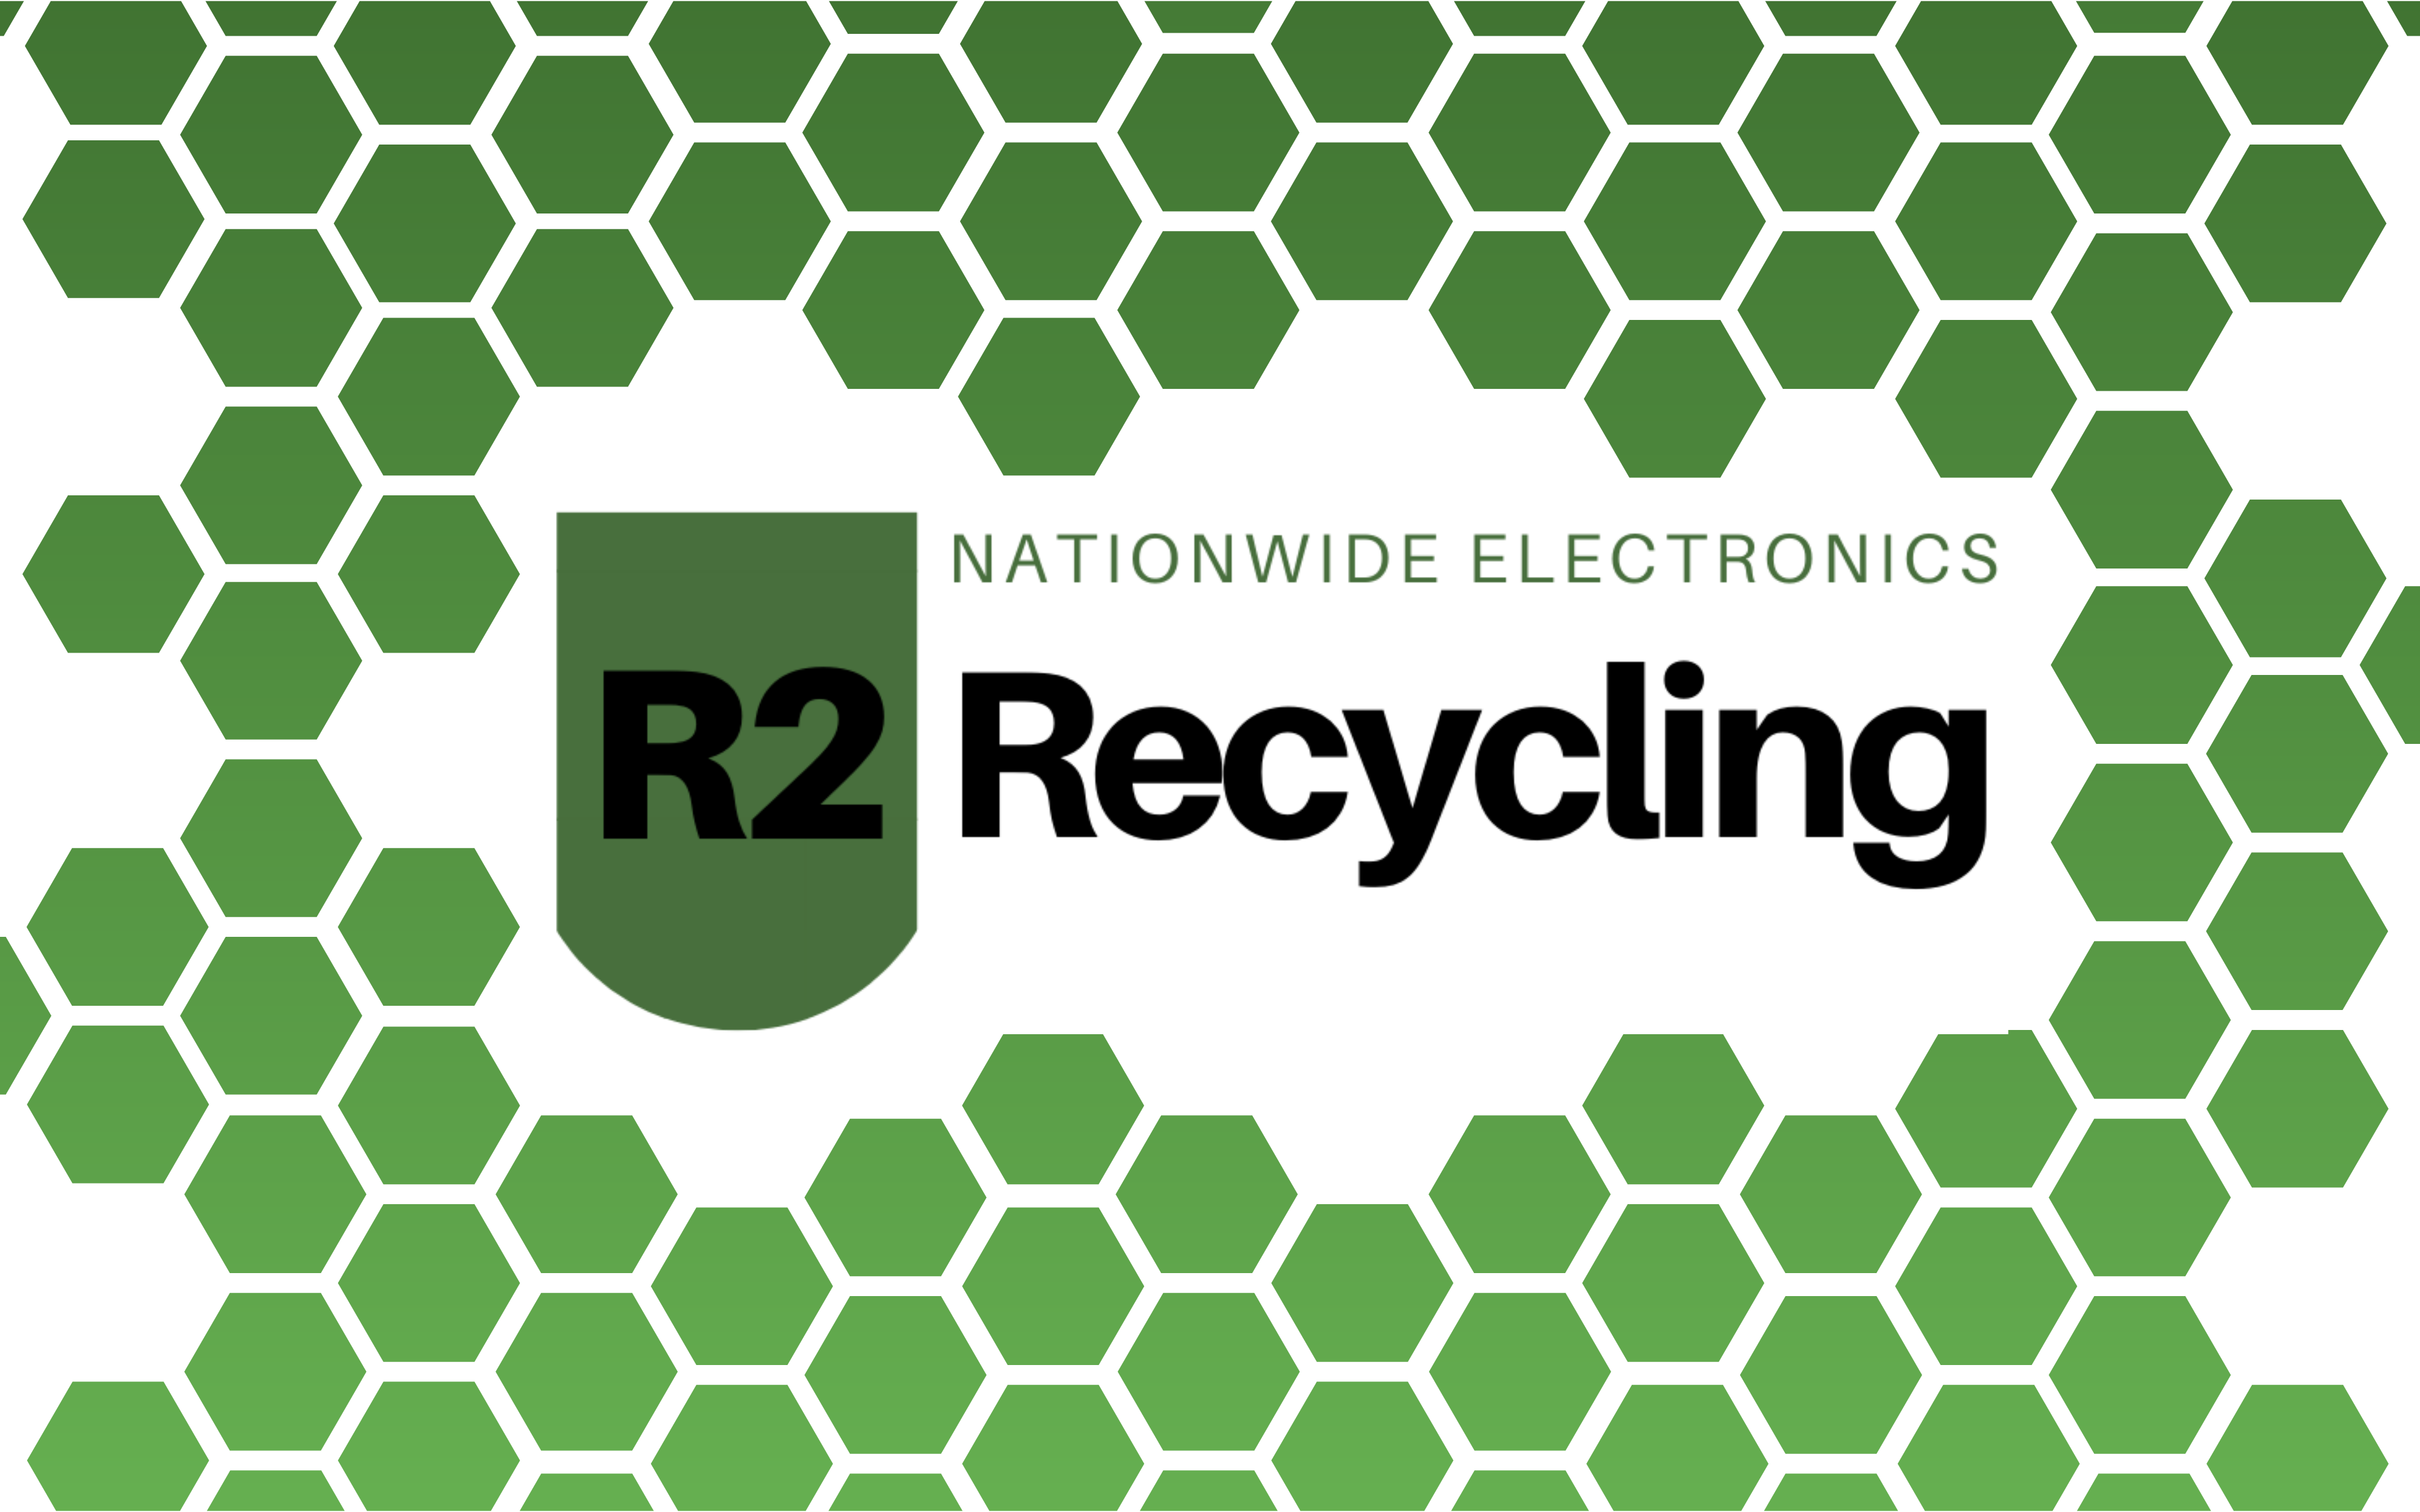 R2 Recycling, Sunday, January 23, 2022, Press release picture